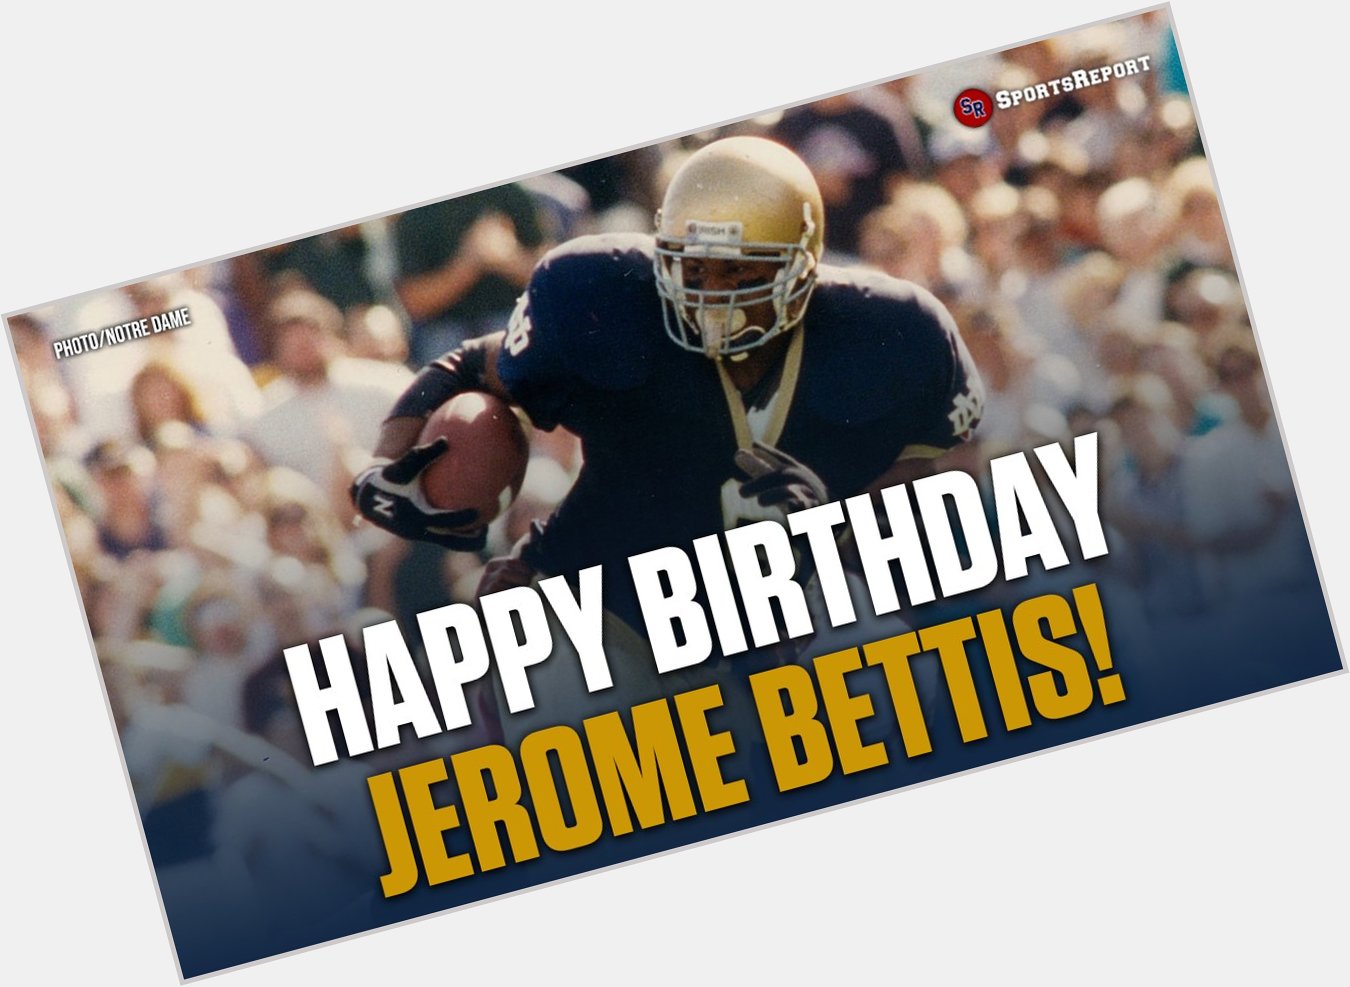  Fans, let\s wish Legend Jerome Bettis a Happy Birthday! 